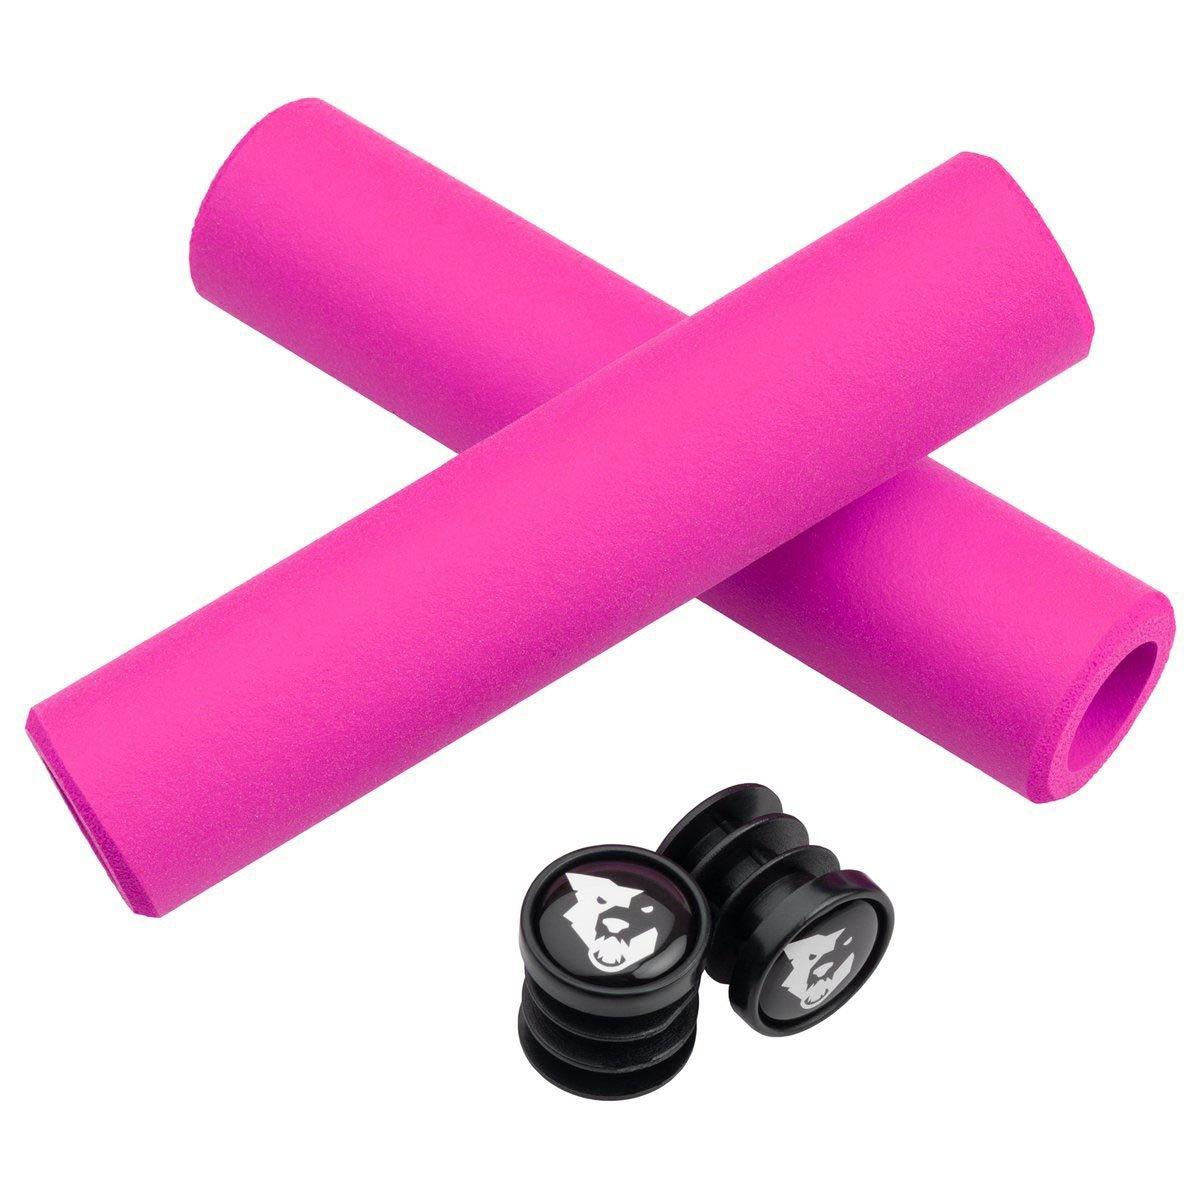 Wolf Tooth Components Wolf Tooth Components Razer Grips Pink